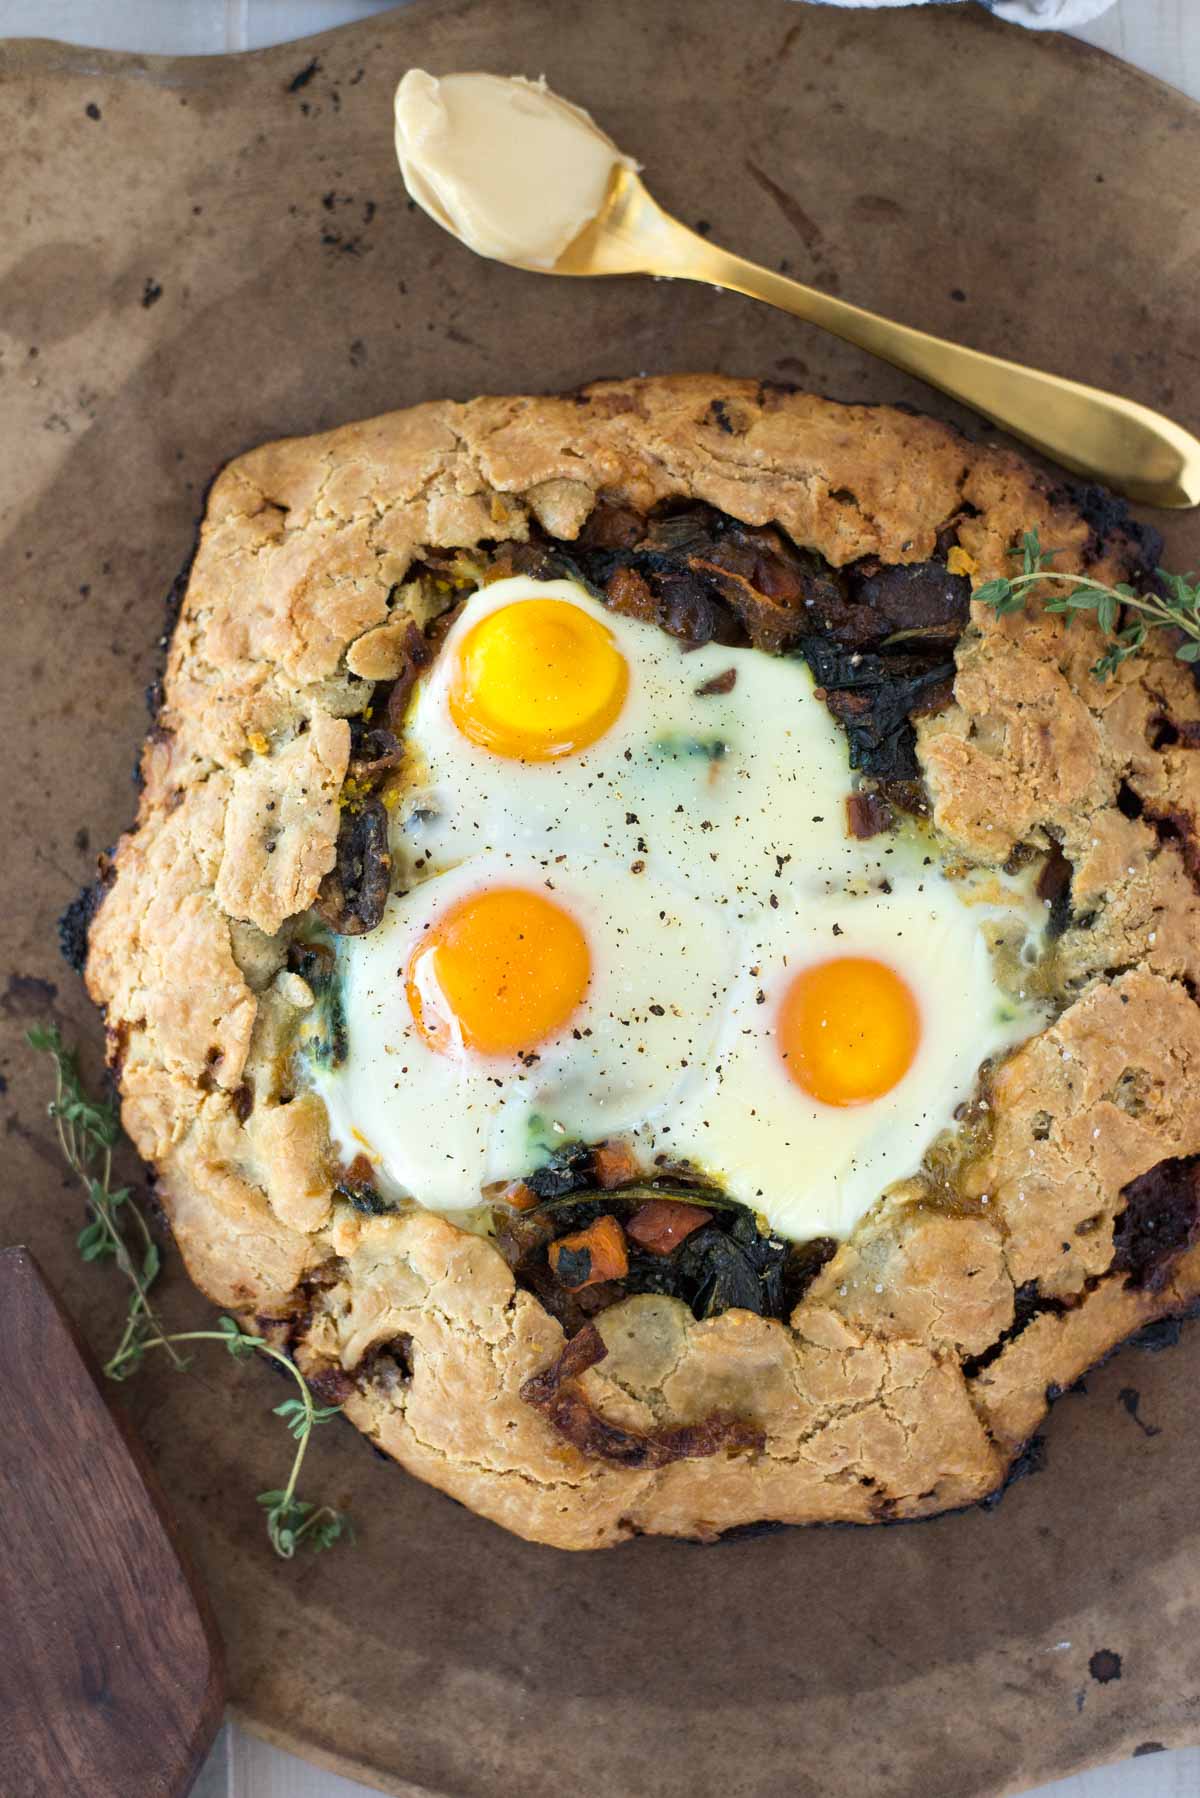 I warmly welcome you to the best kept brunch secret in town, this breakfast galette holding a delicious secret. 